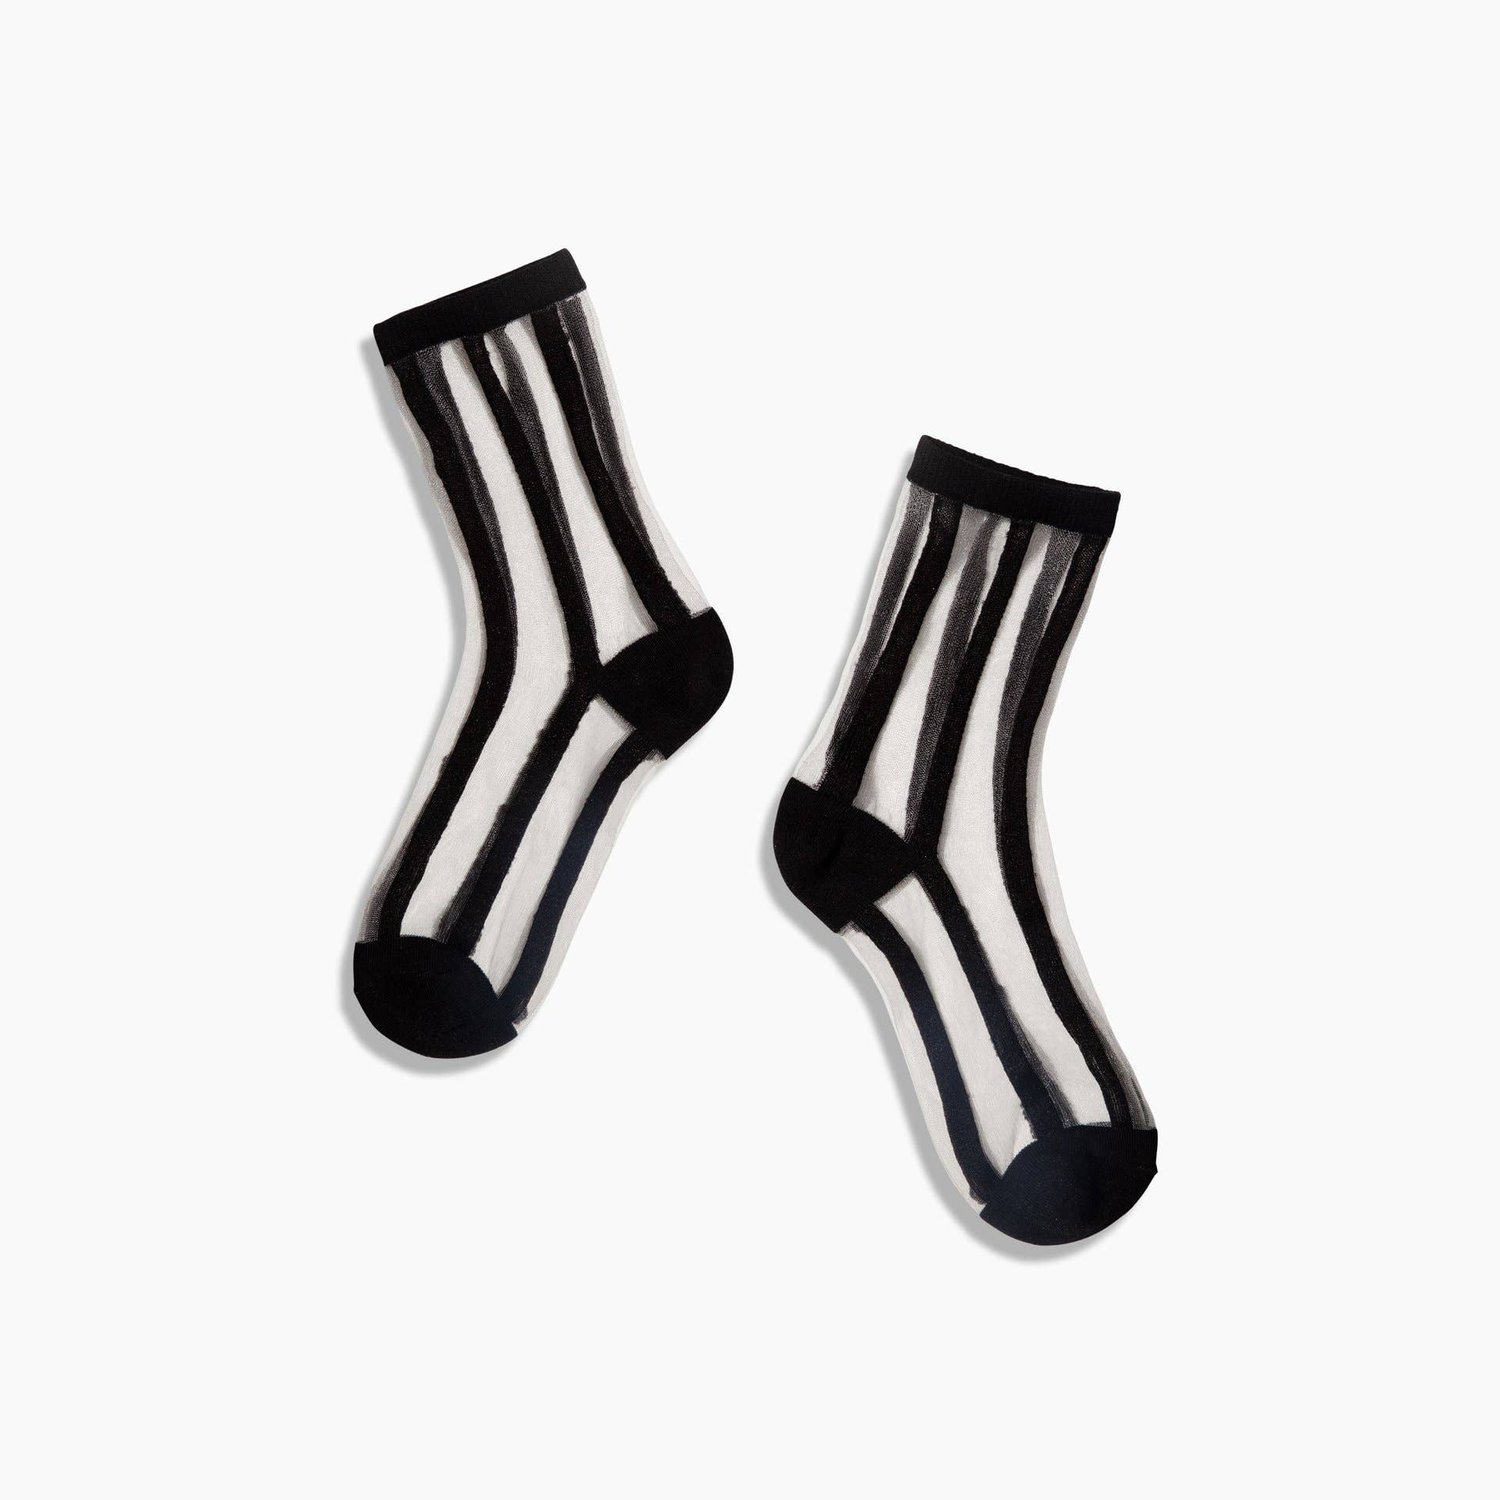 New! Sheer See-Through Ankle Height Socks With Black Line Stripes By ...